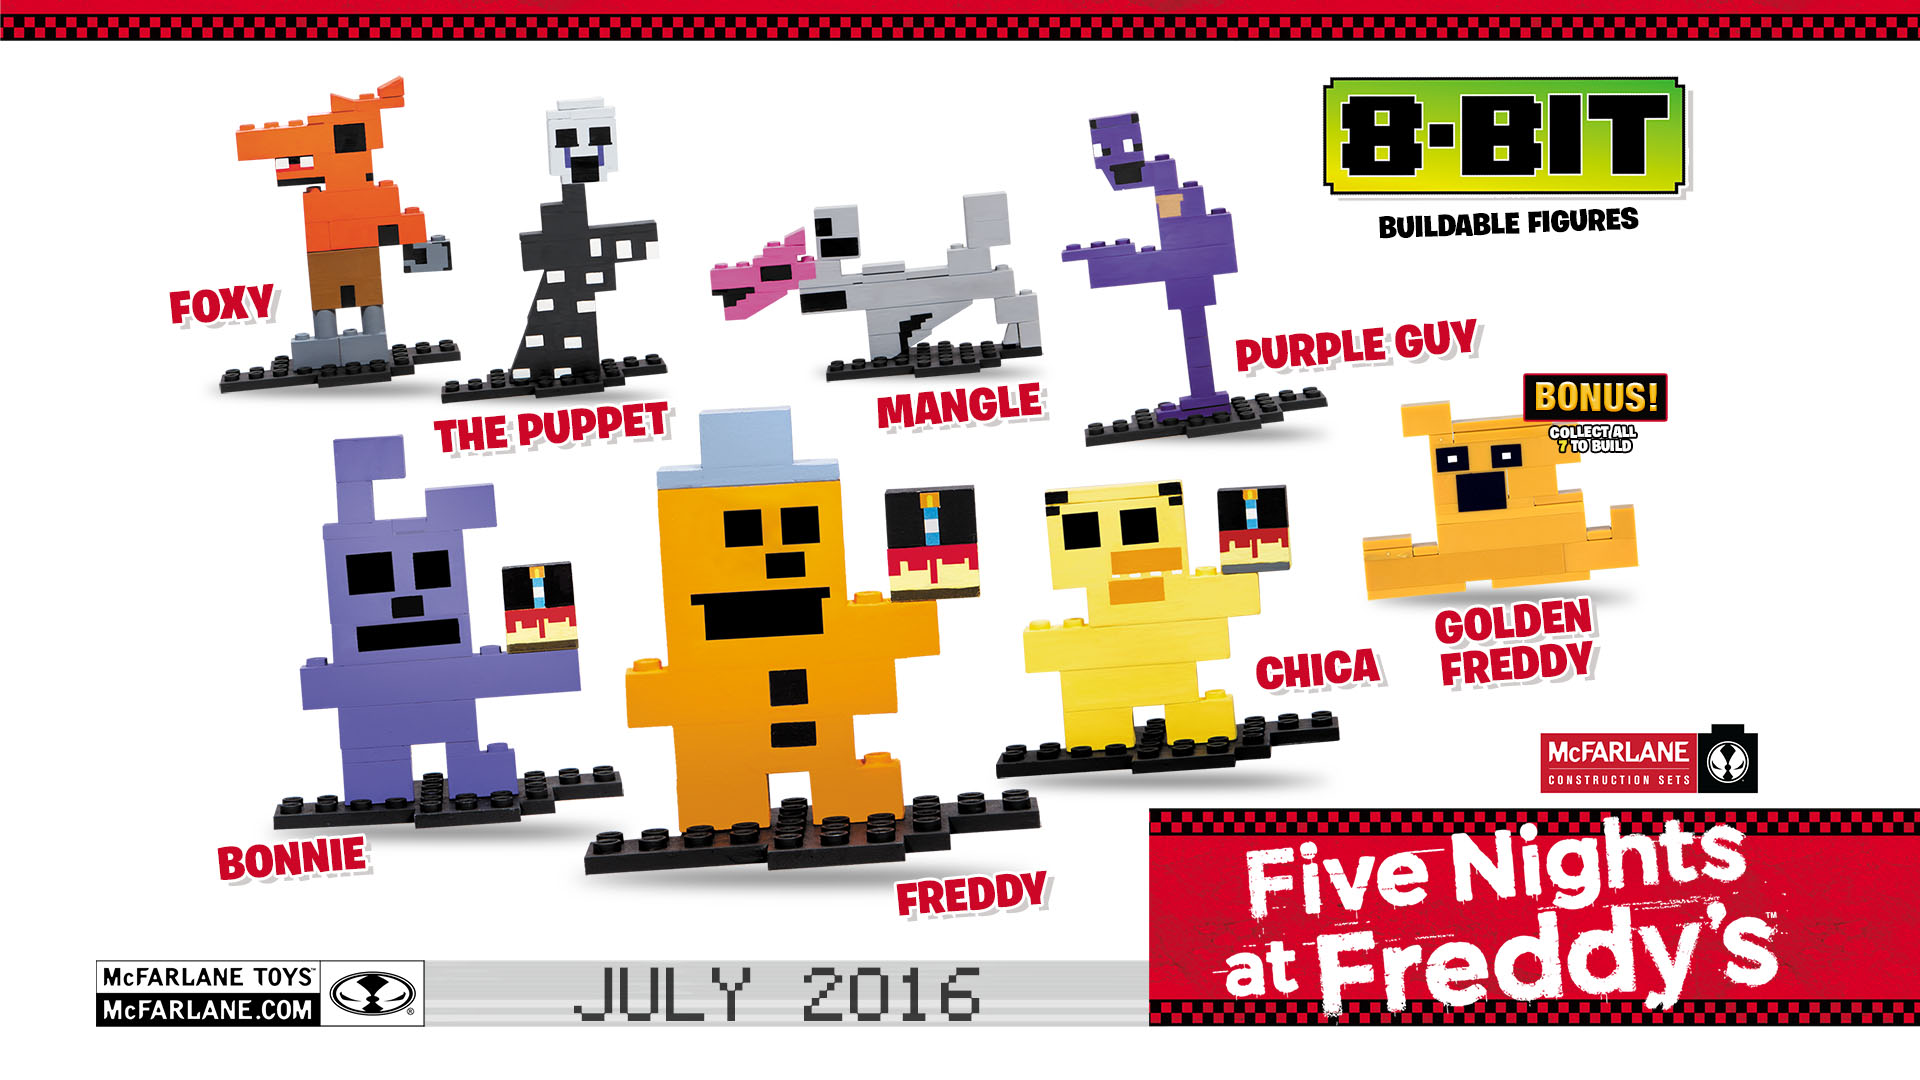 8-Piece Five Nights at Freddy's Lego-Compatible Block Mini Figure Toys Set  – BeyBurst